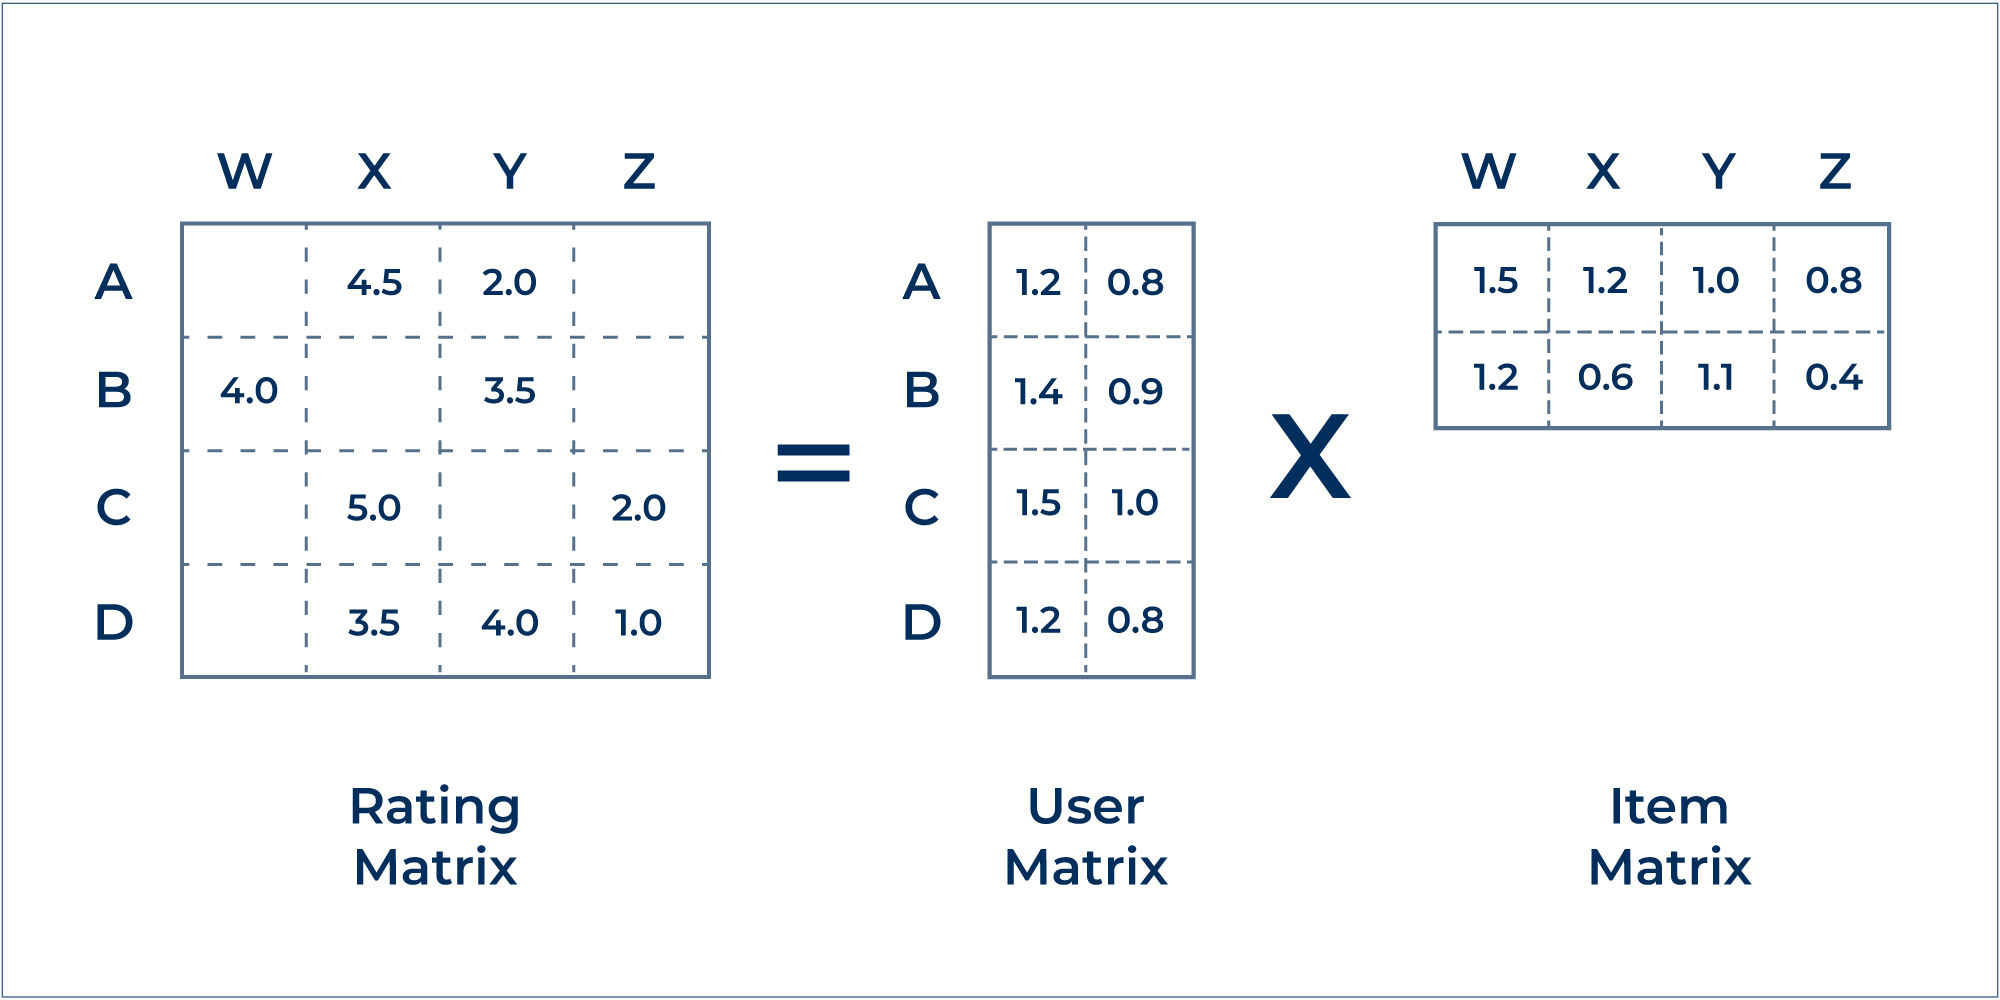 In ALS, the user-item interaction matrix is factorized into two lower-dimensional matrices